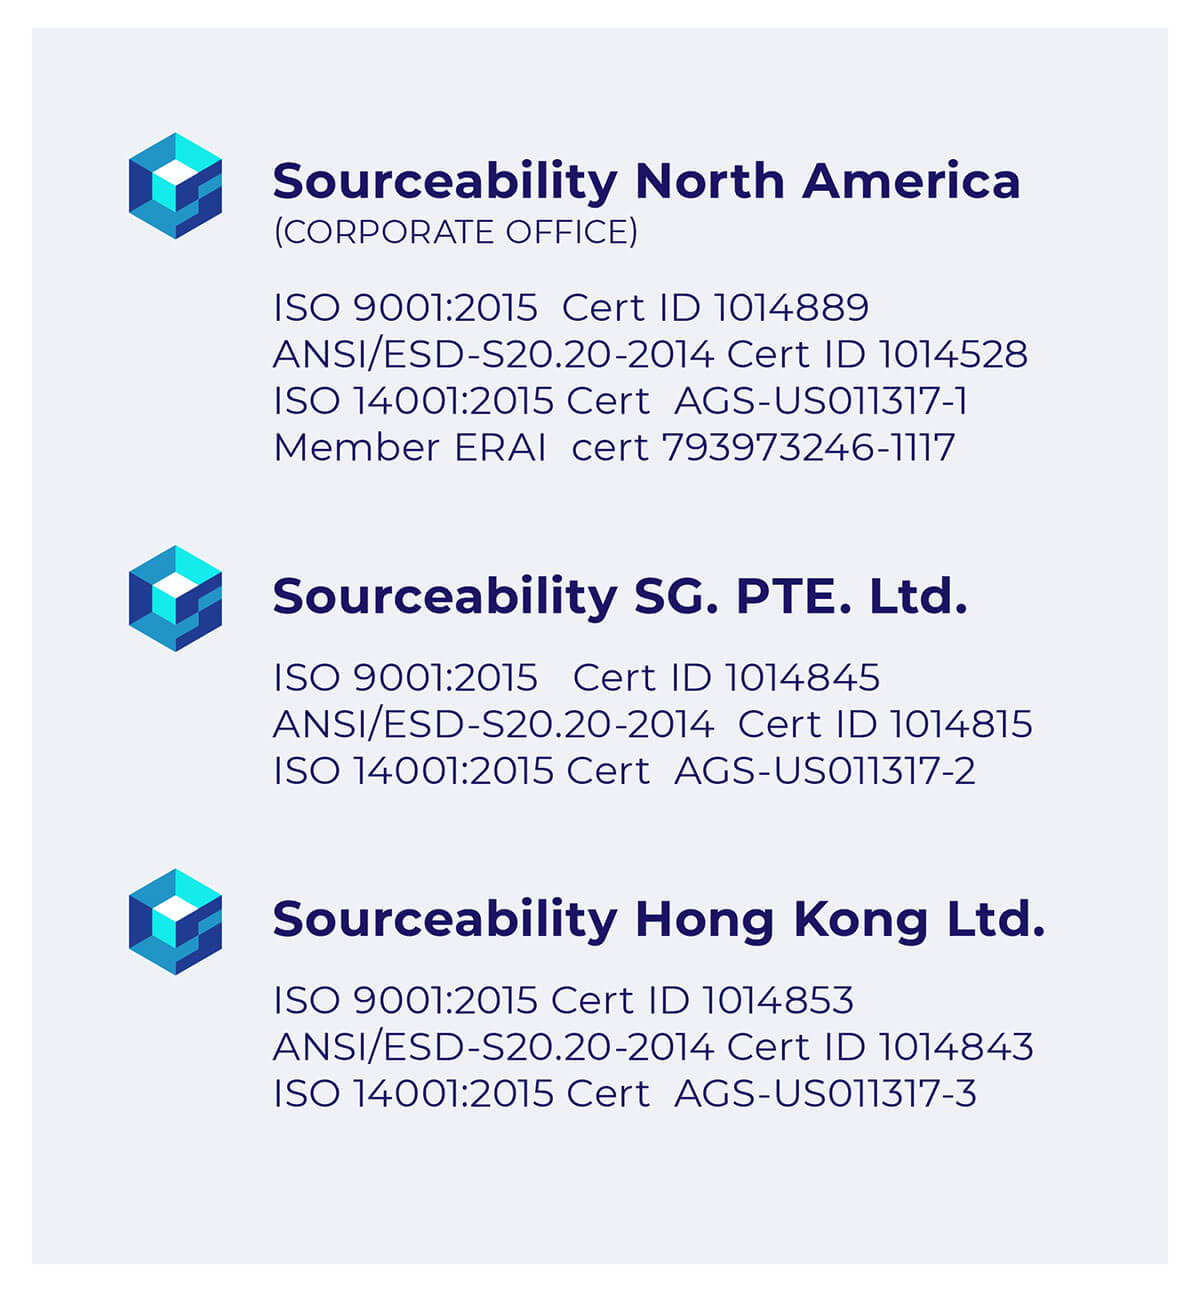 Sourceability is ISO certified across the globe and powers Sourcengine's distribution